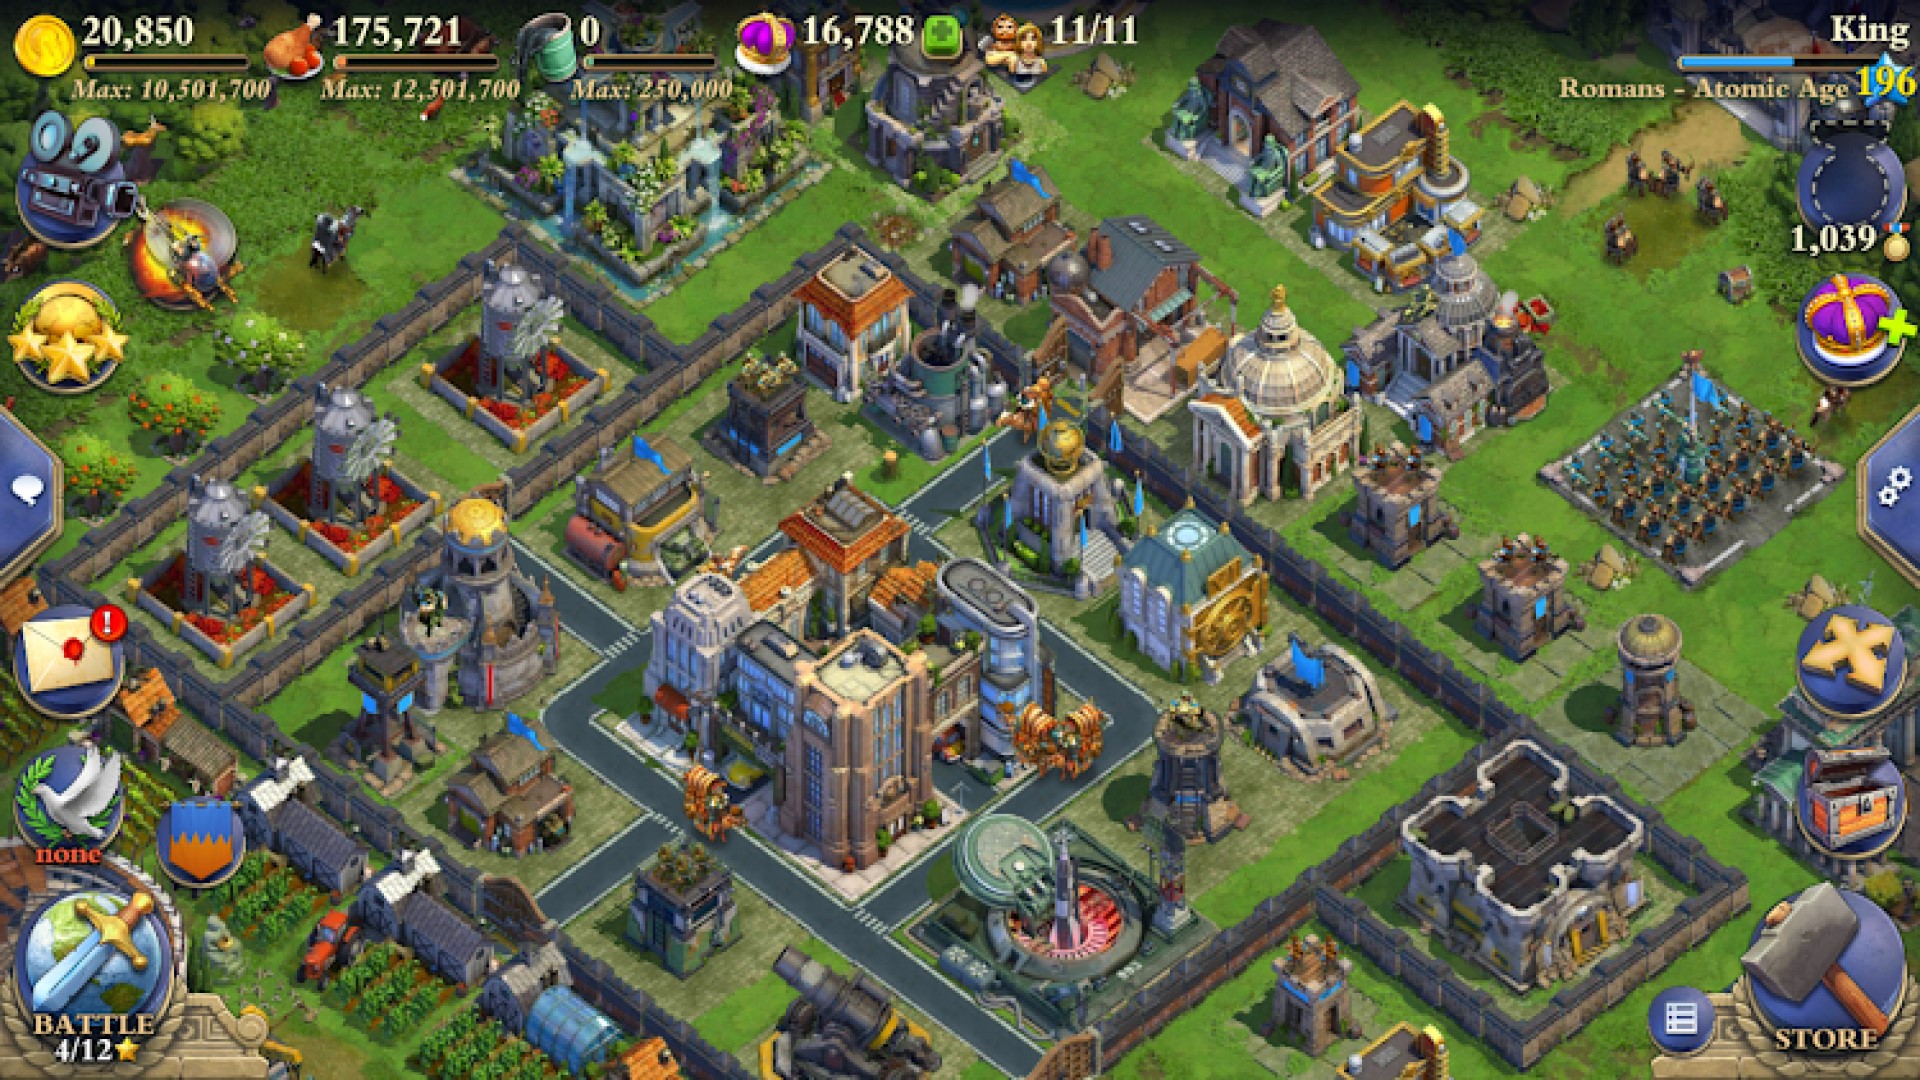 15 best strategy games for Android and iOS - PhoneArena